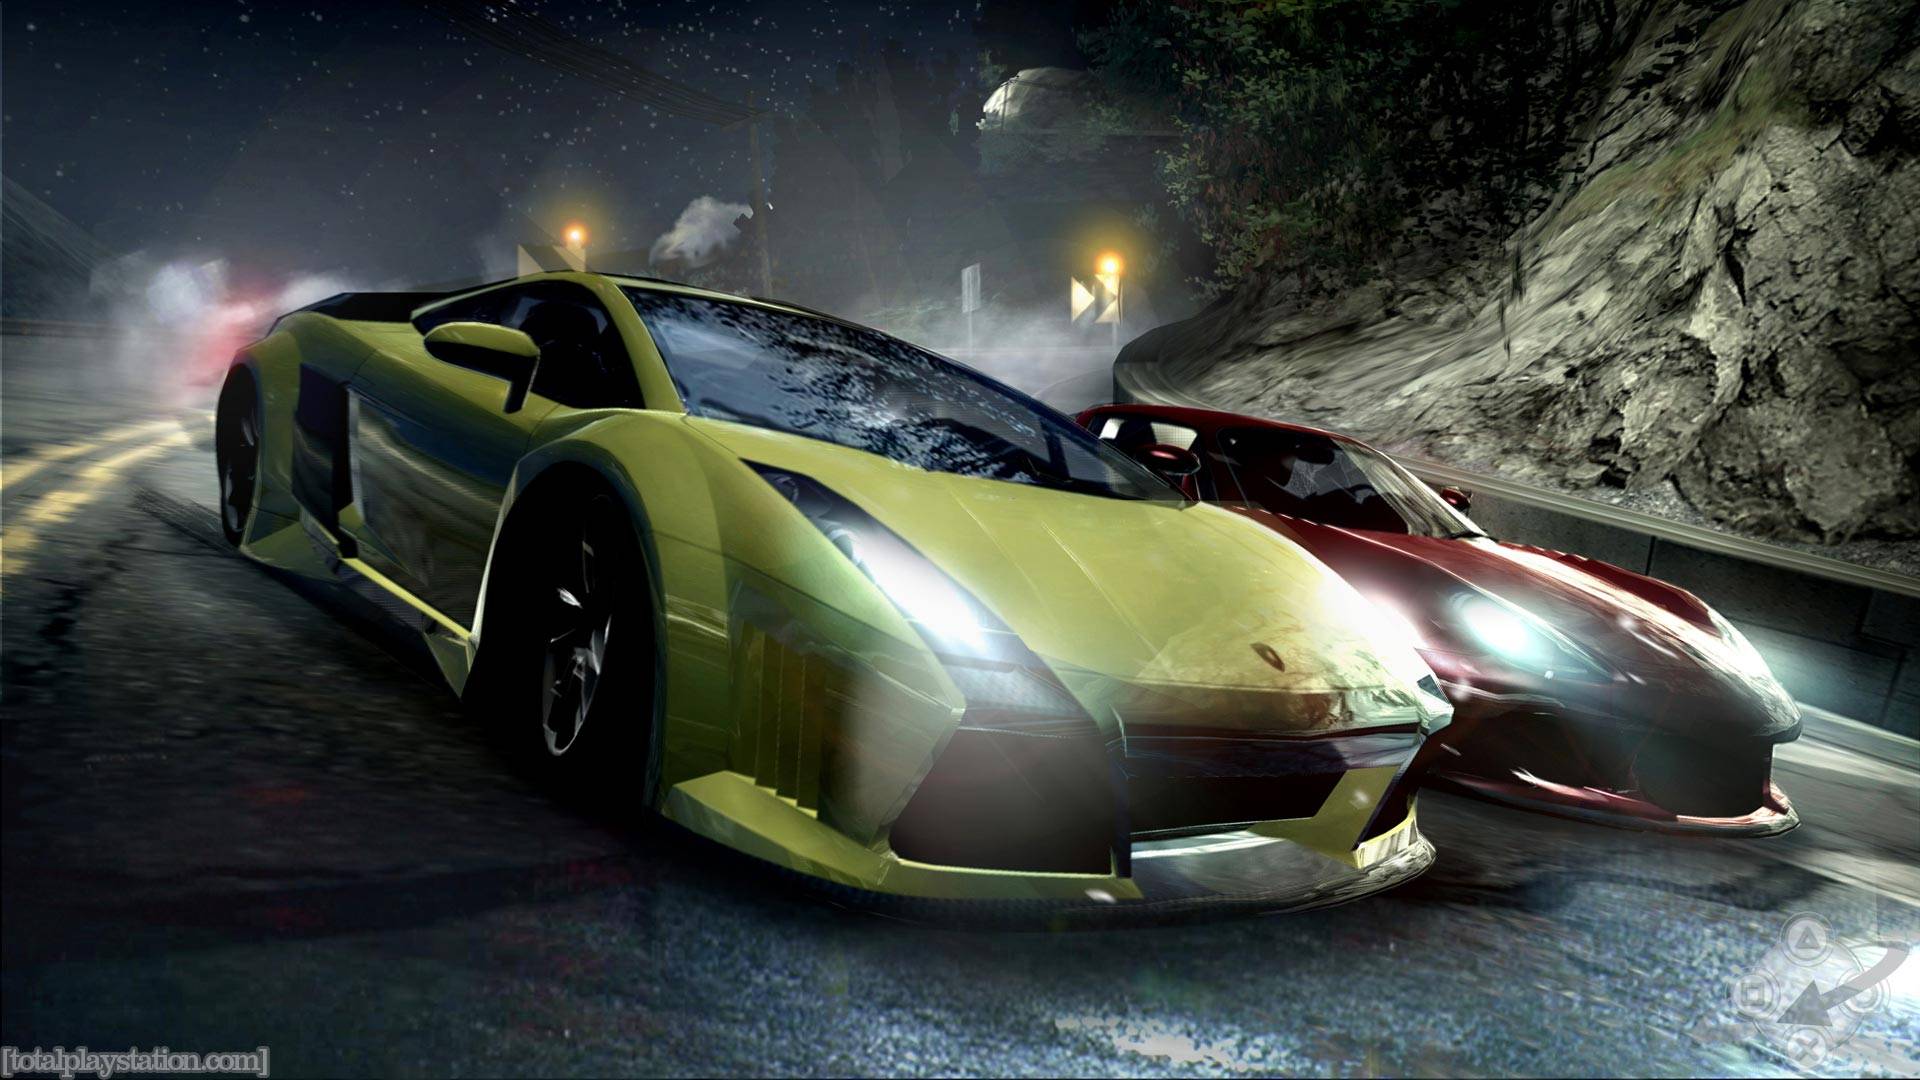 Free Download Nfs Carbon Need For Speed Wallpaper 19x1080 For Your Desktop Mobile Tablet Explore 72 Nfs Wallpaper Change Wallpaper Speed Nfs Rivals Wallpaper Nfs Most Wanted Wallpapers